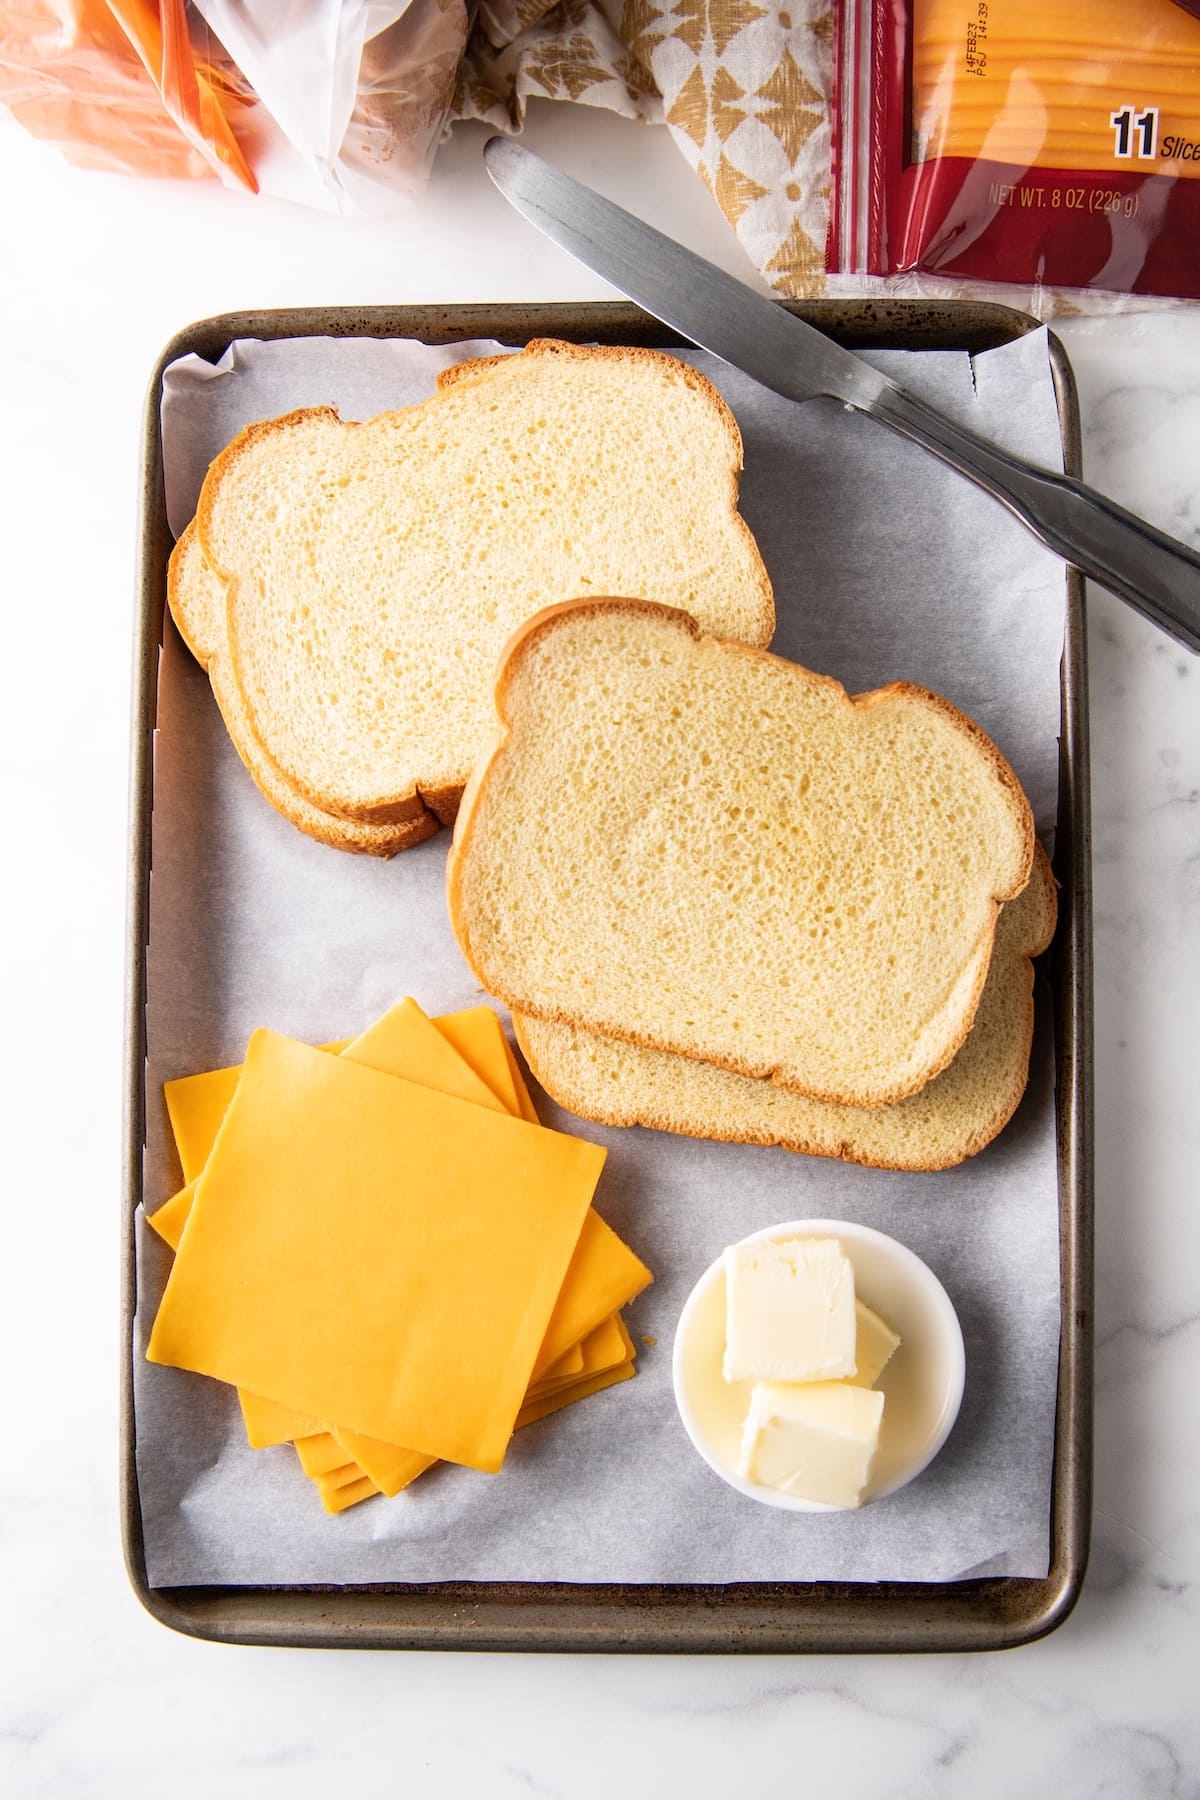 Ingredients on a small sheet tray to make grilled cheese sandwiches - sliced bread, cheddar cheese, and butter